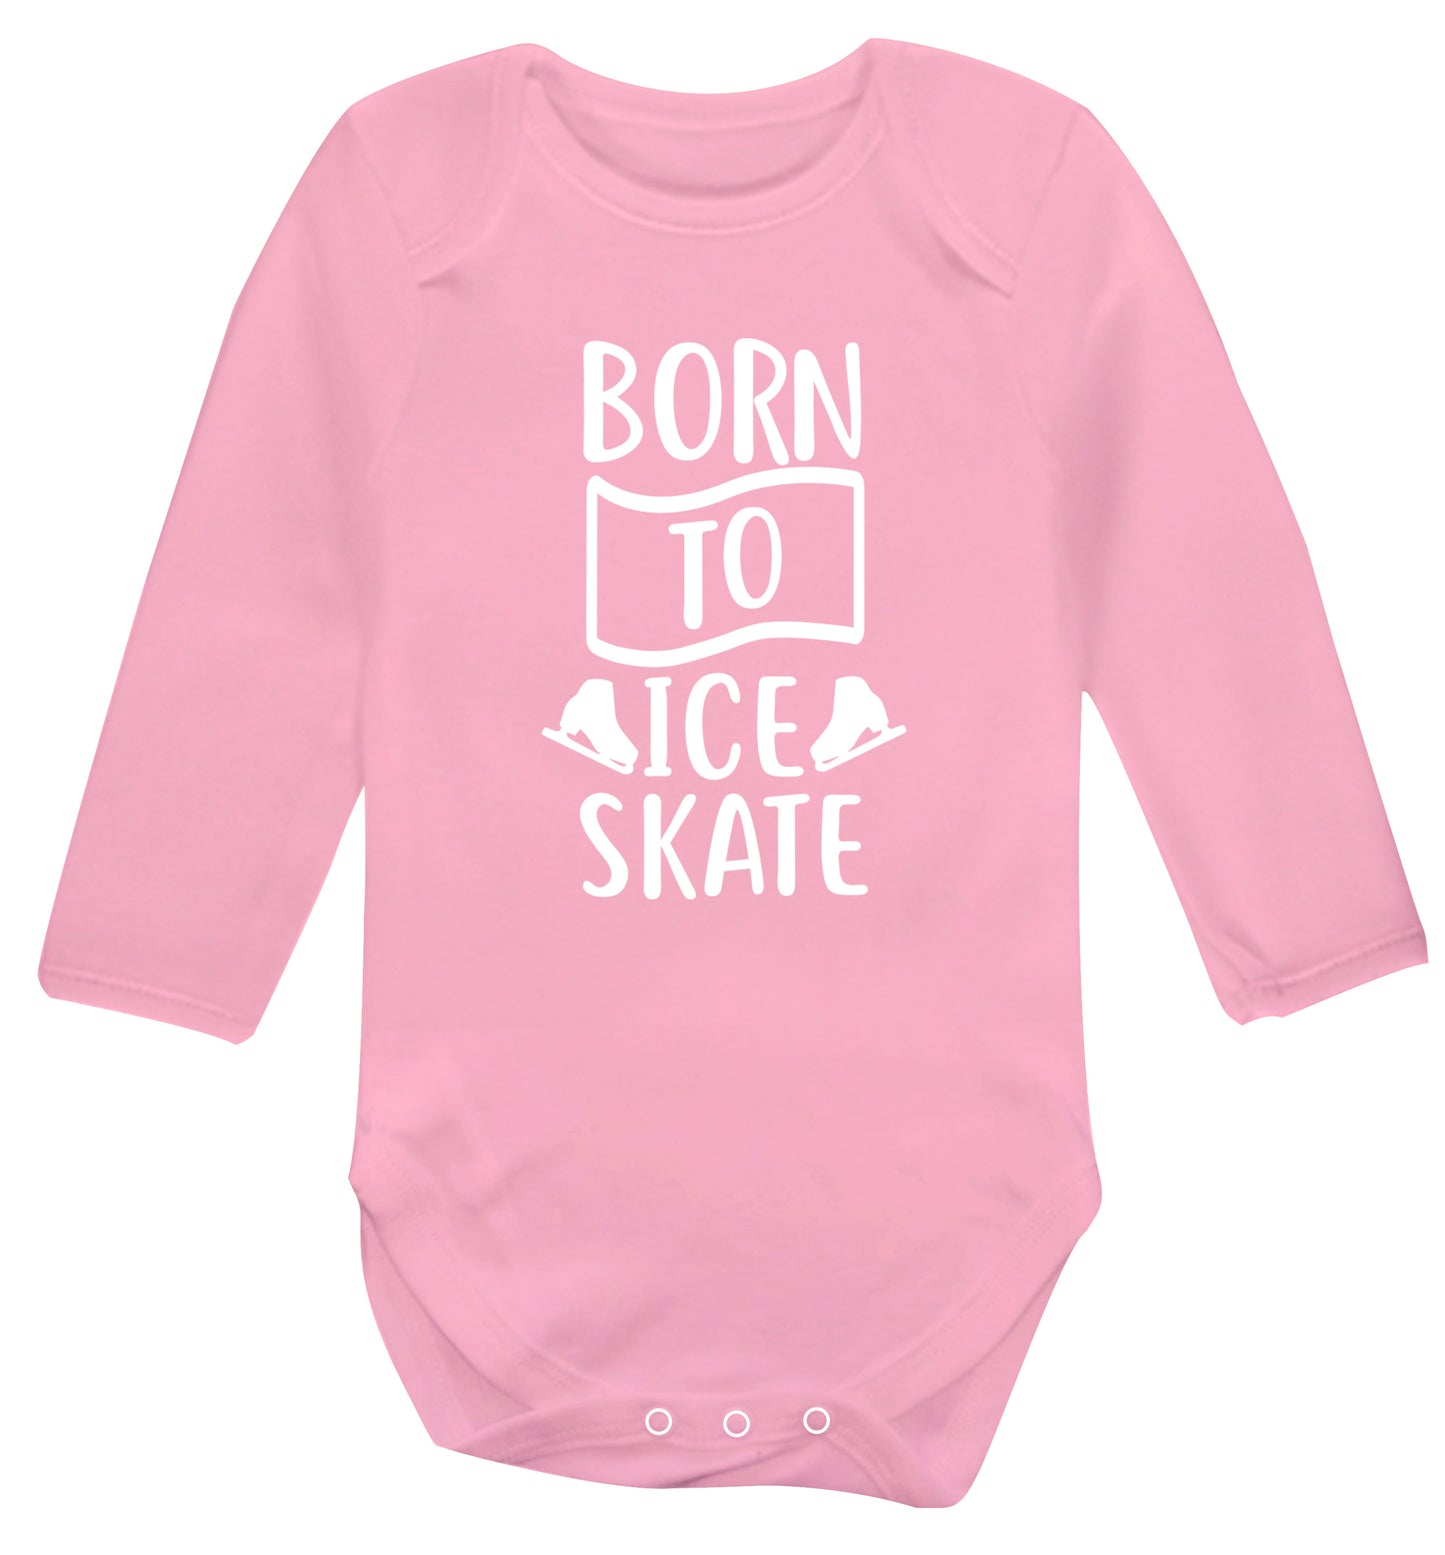 I ice skate because I like it not because I'm good at it Baby Vest long sleeved pale pink 6-12 months